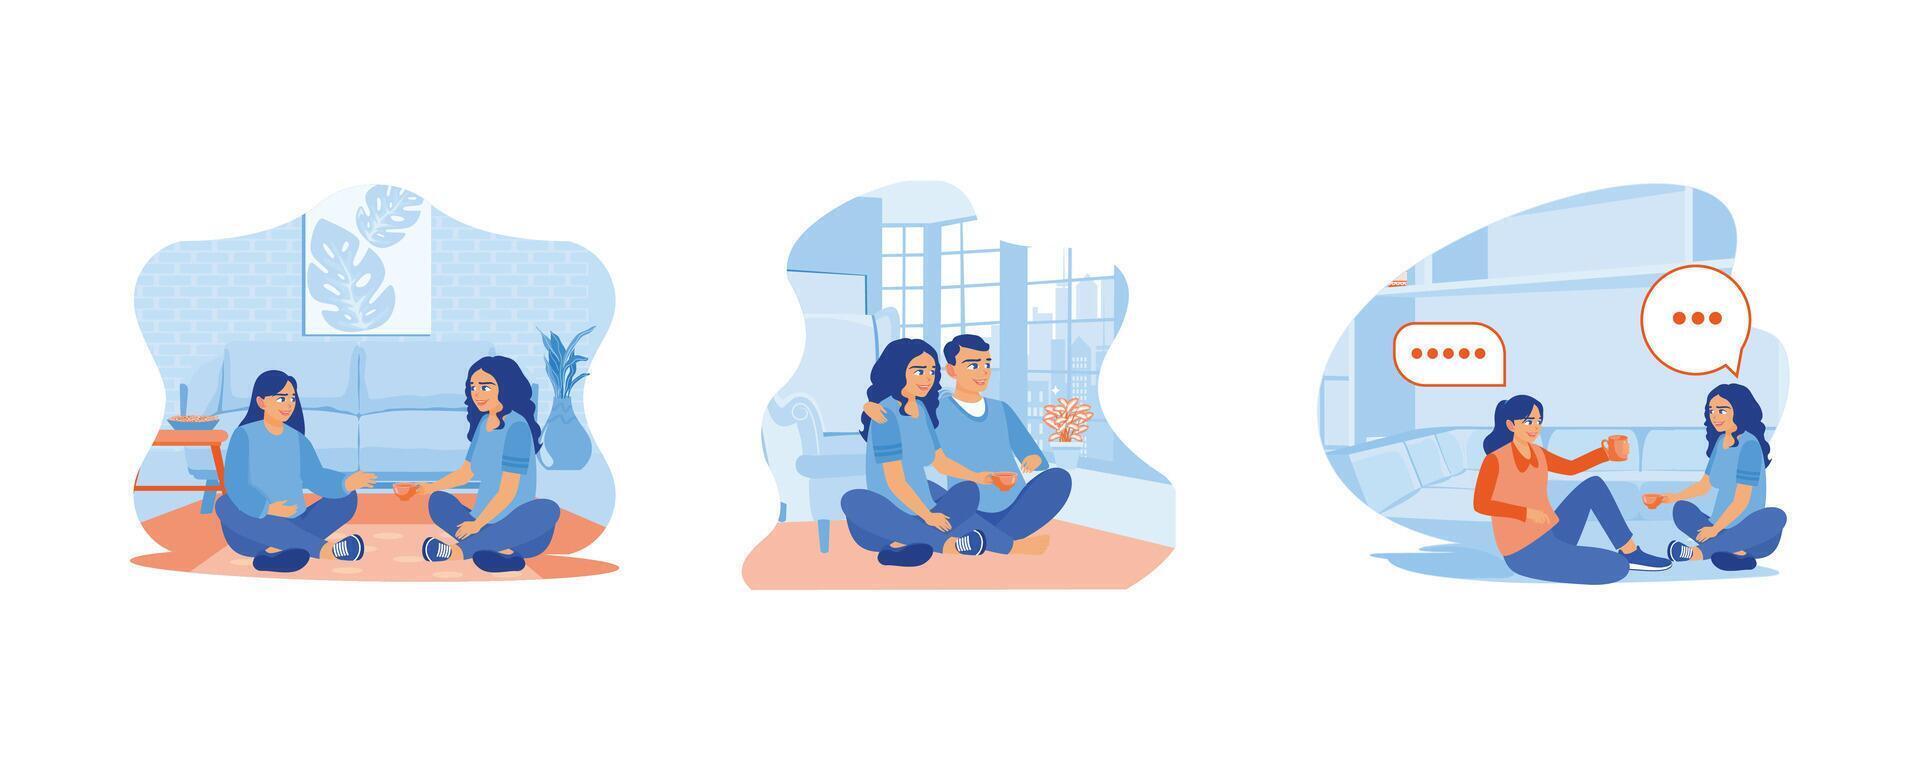 A young couple is sitting on the floor inside the house. Drink tea while chatting together. Two young women are discussing while drinking tea together. vector